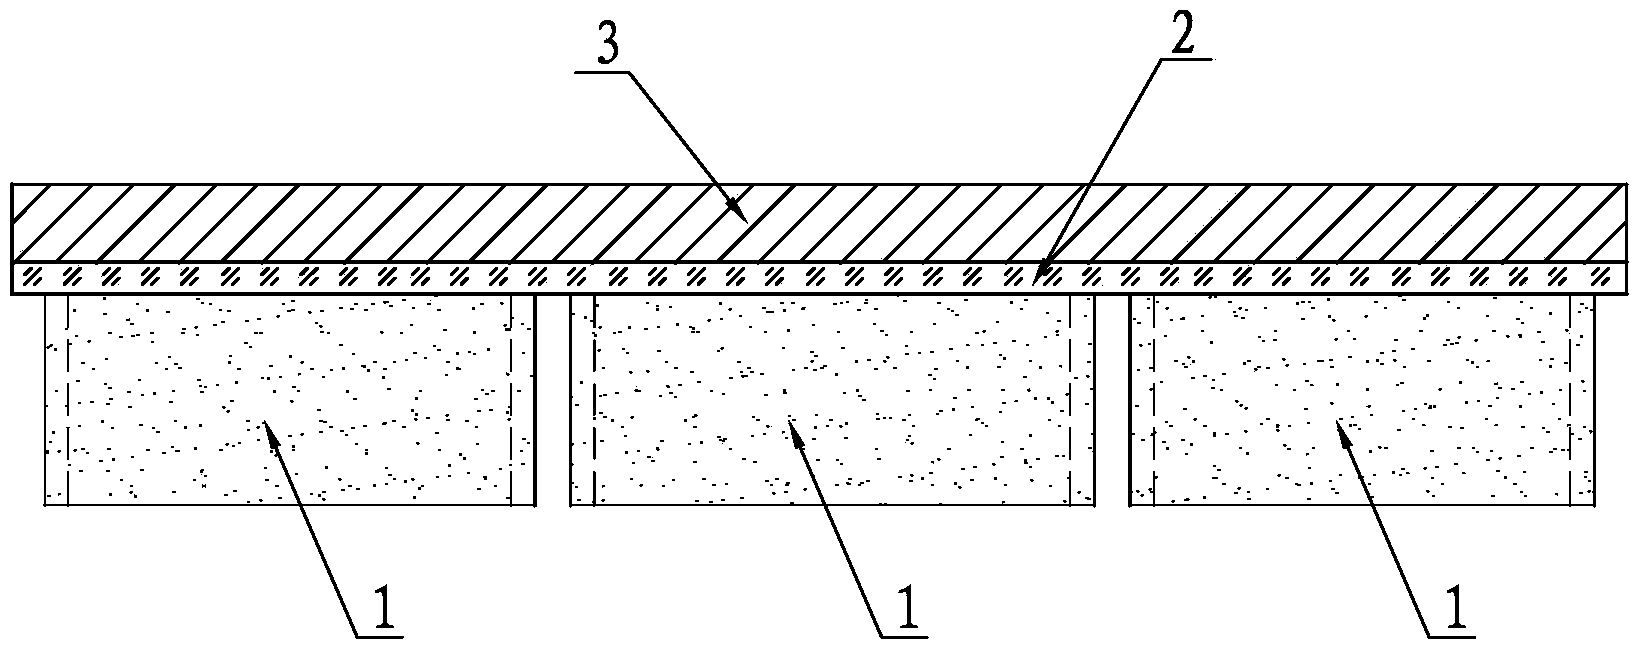 Method for preventing wire cutting steel wires from being broken and improving silicon wafer yield